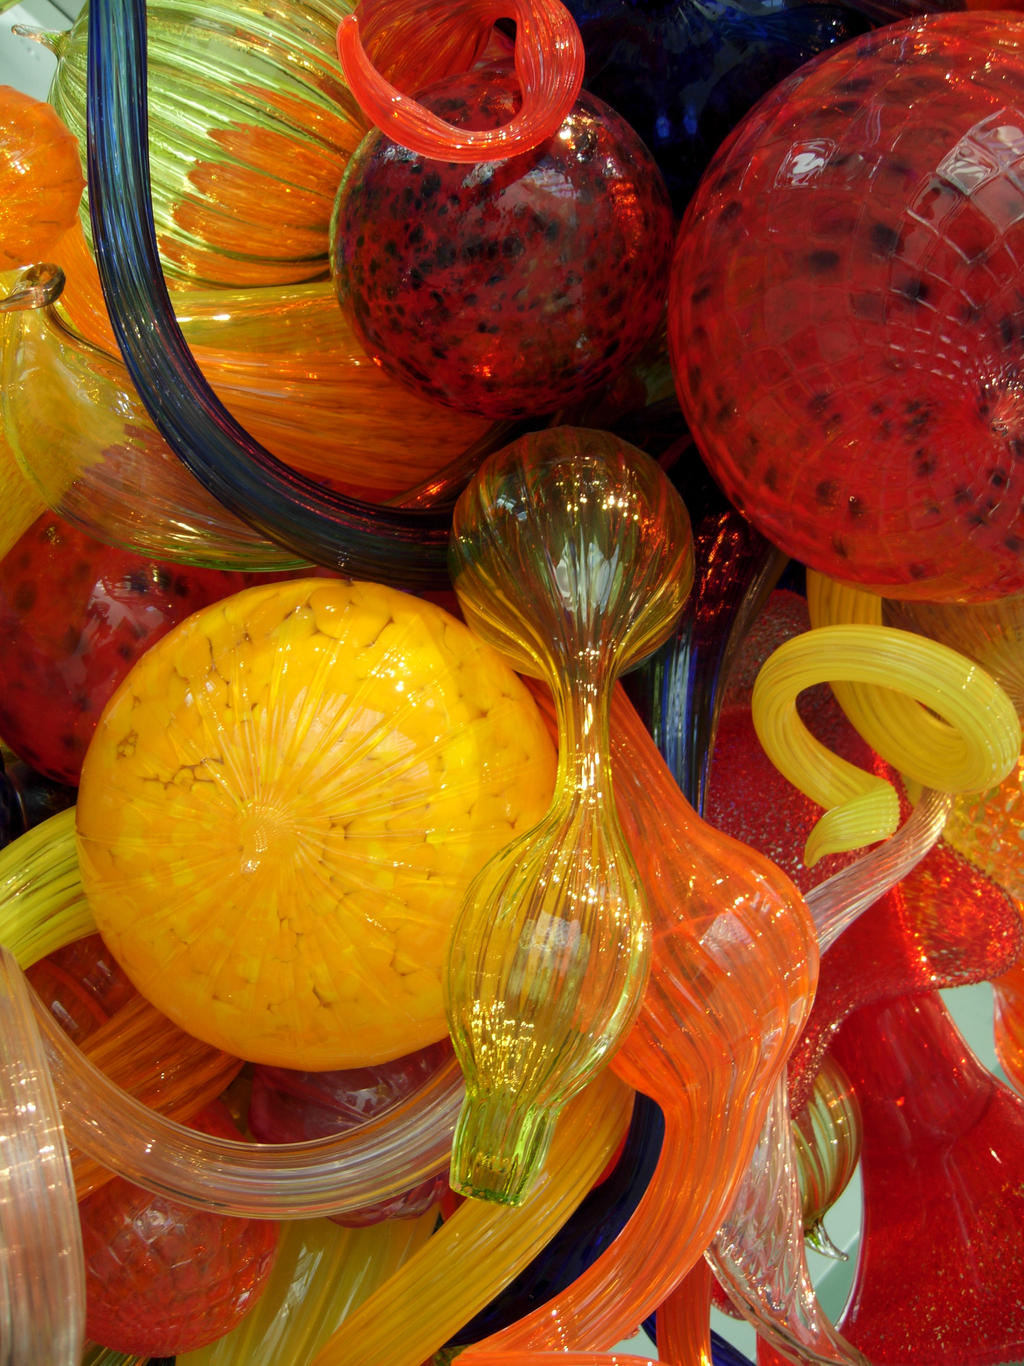 Dale Chihuly's Milwaukee Art Museum Piece